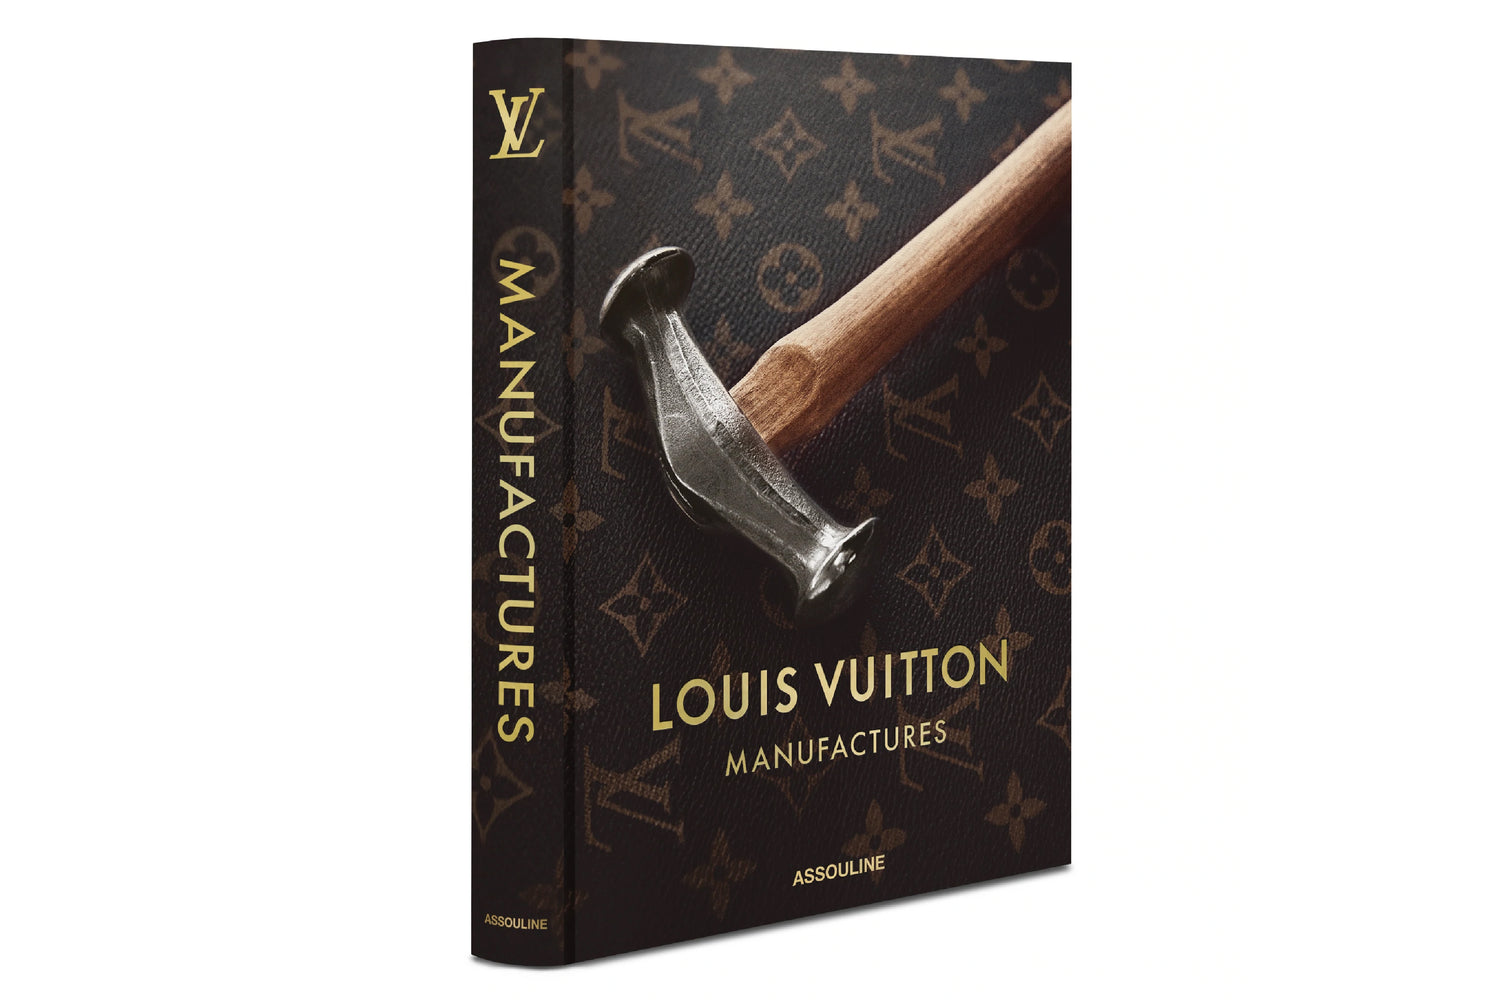 Where Is Louis Vuitton Made?  Detailed Review of the *NEW* Louis Vuitton  Manufactures Book 